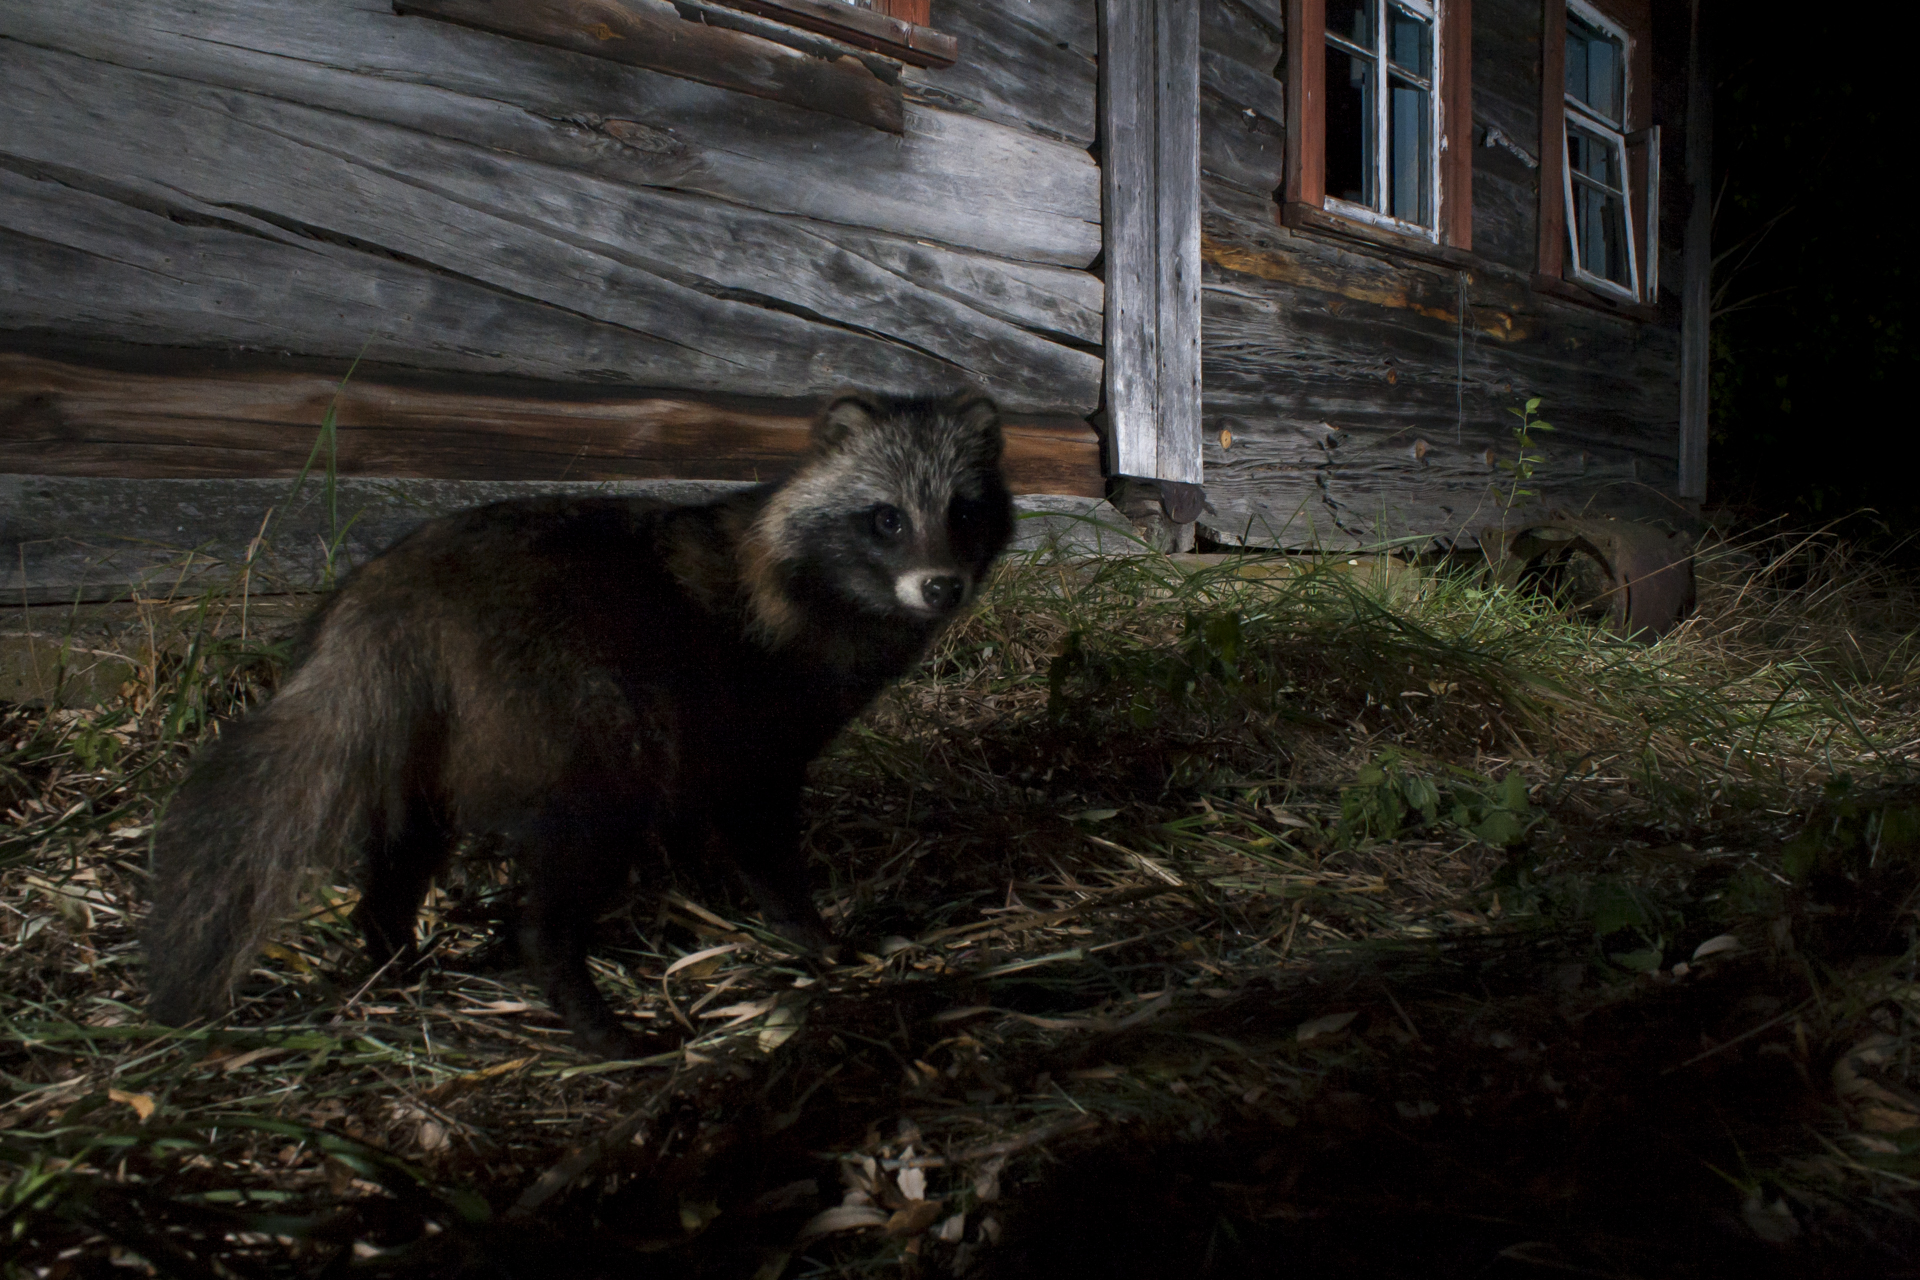  Racoon dogs thrive, escapes from fur farms they can be found across eastern Europe. 